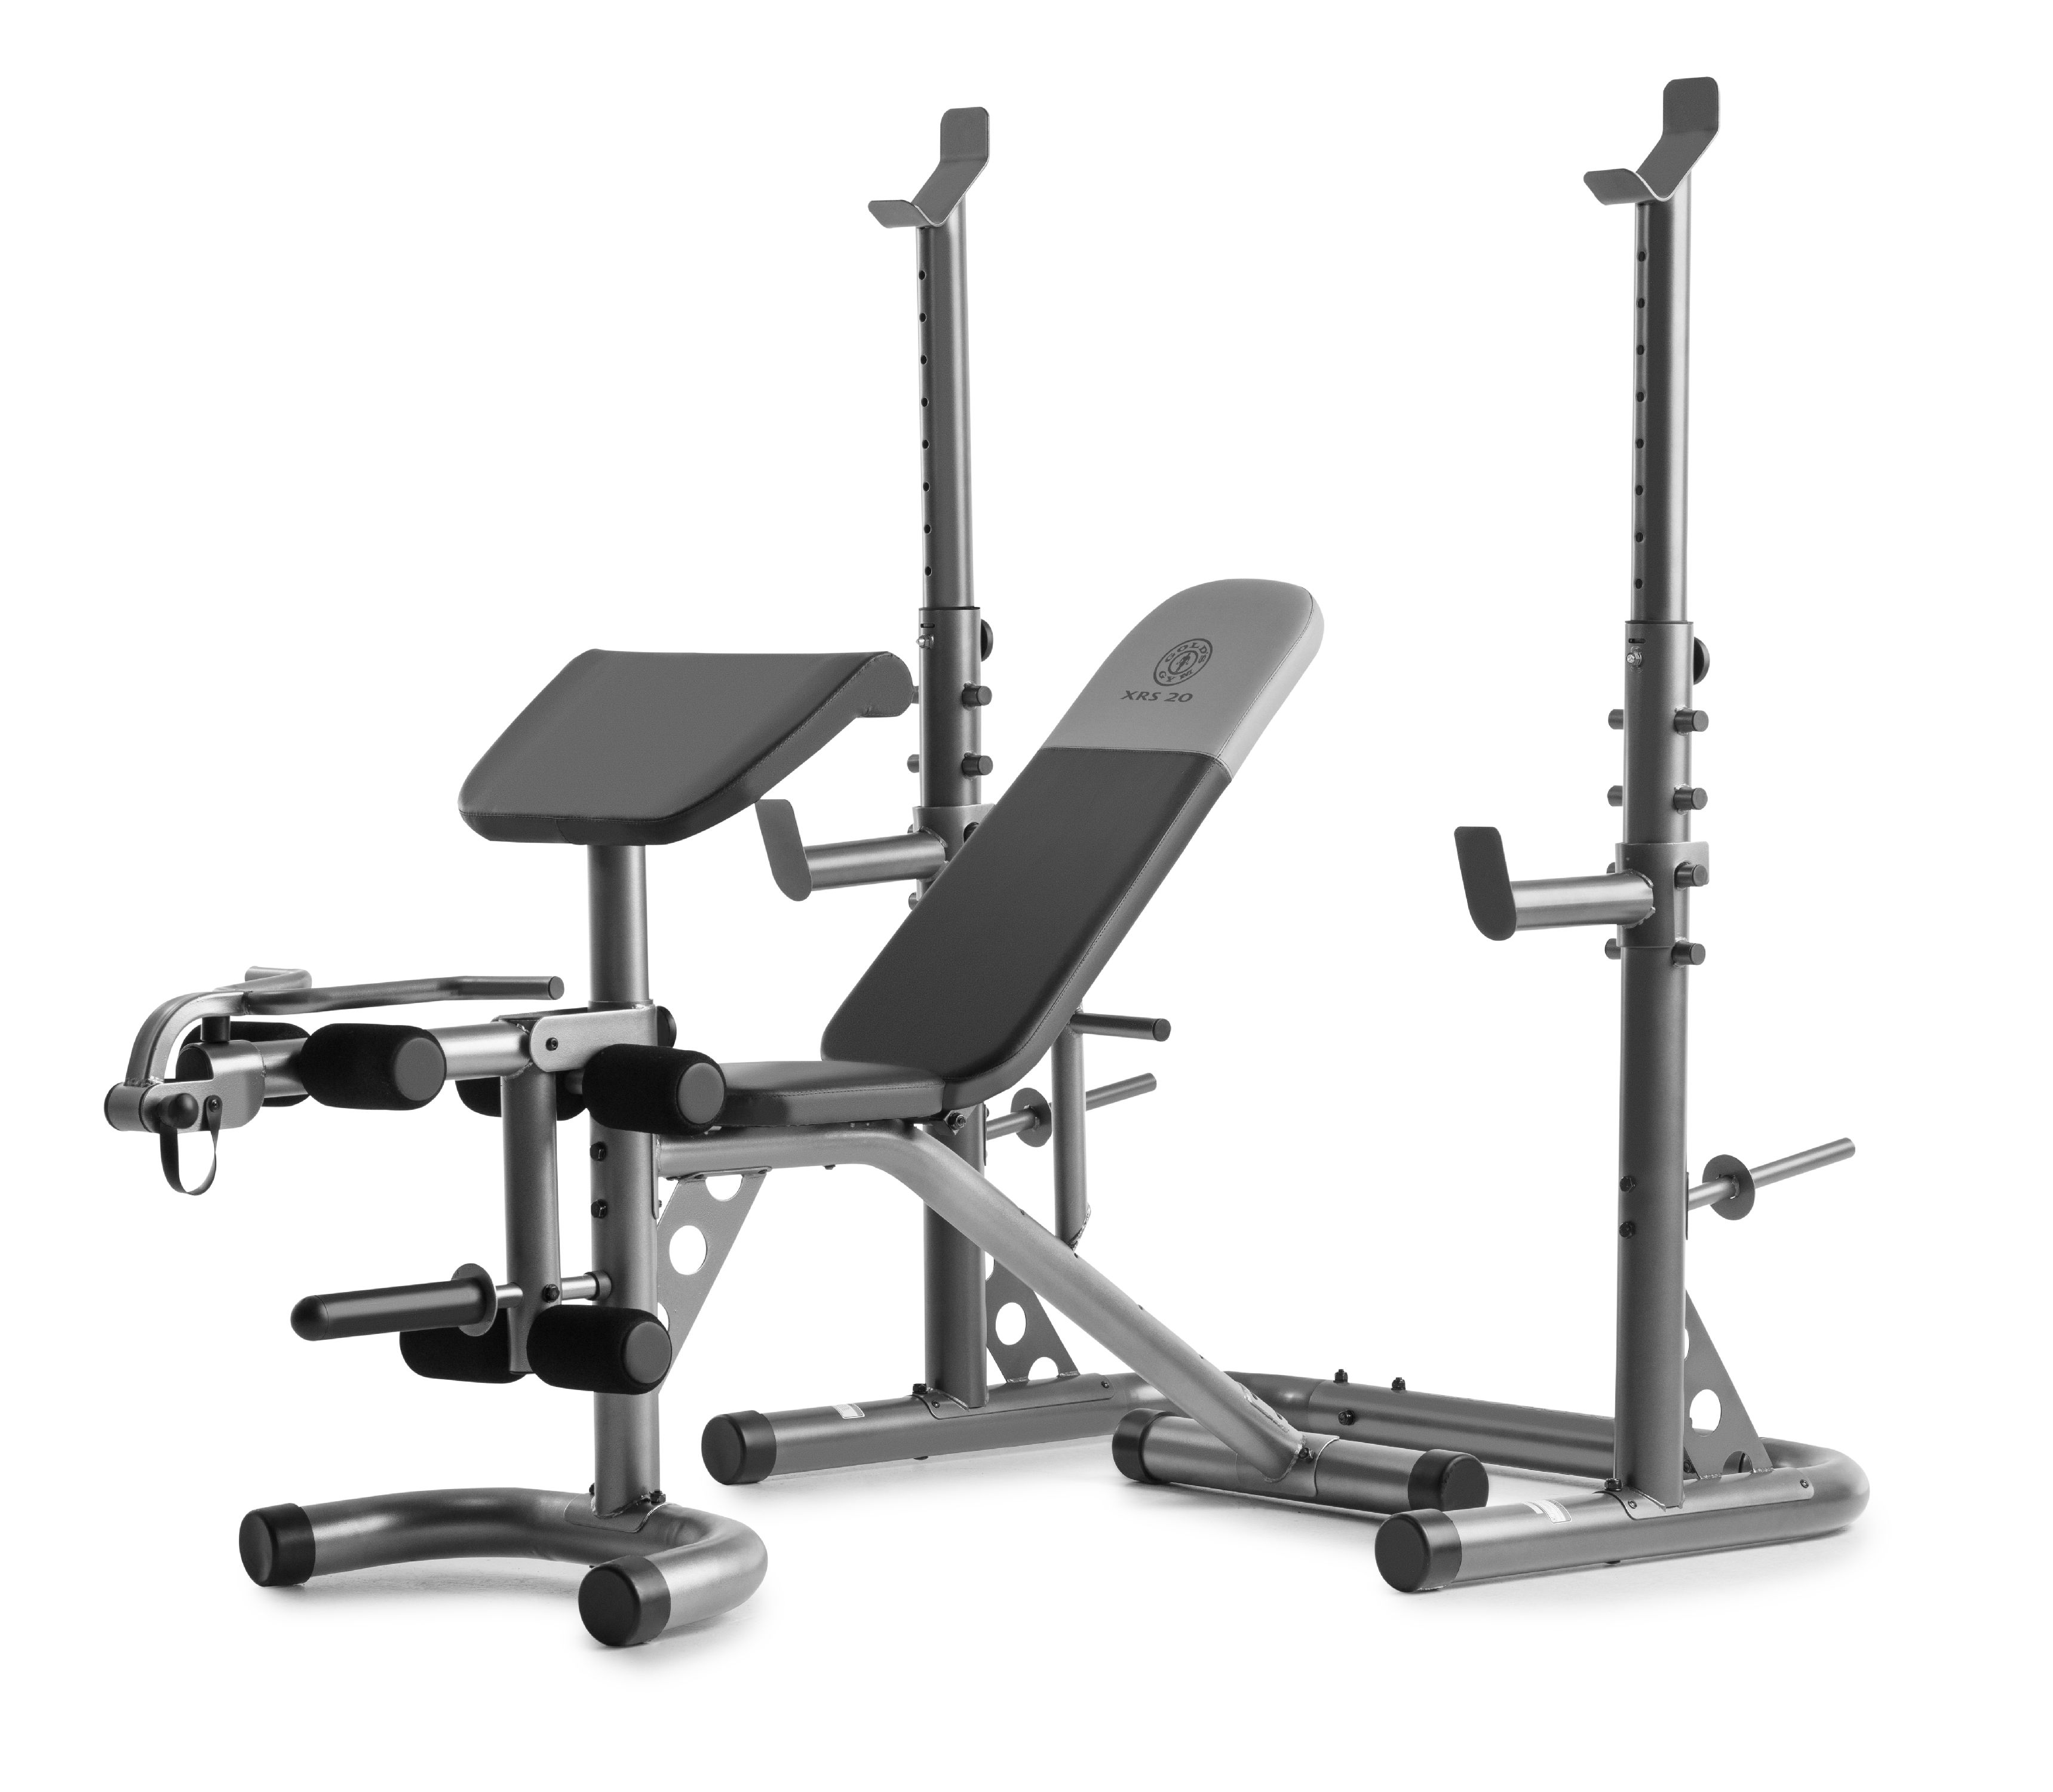 Buy Golds Gym Xrs 20 Adjustable Olympic Workout Bench With Squat Rack